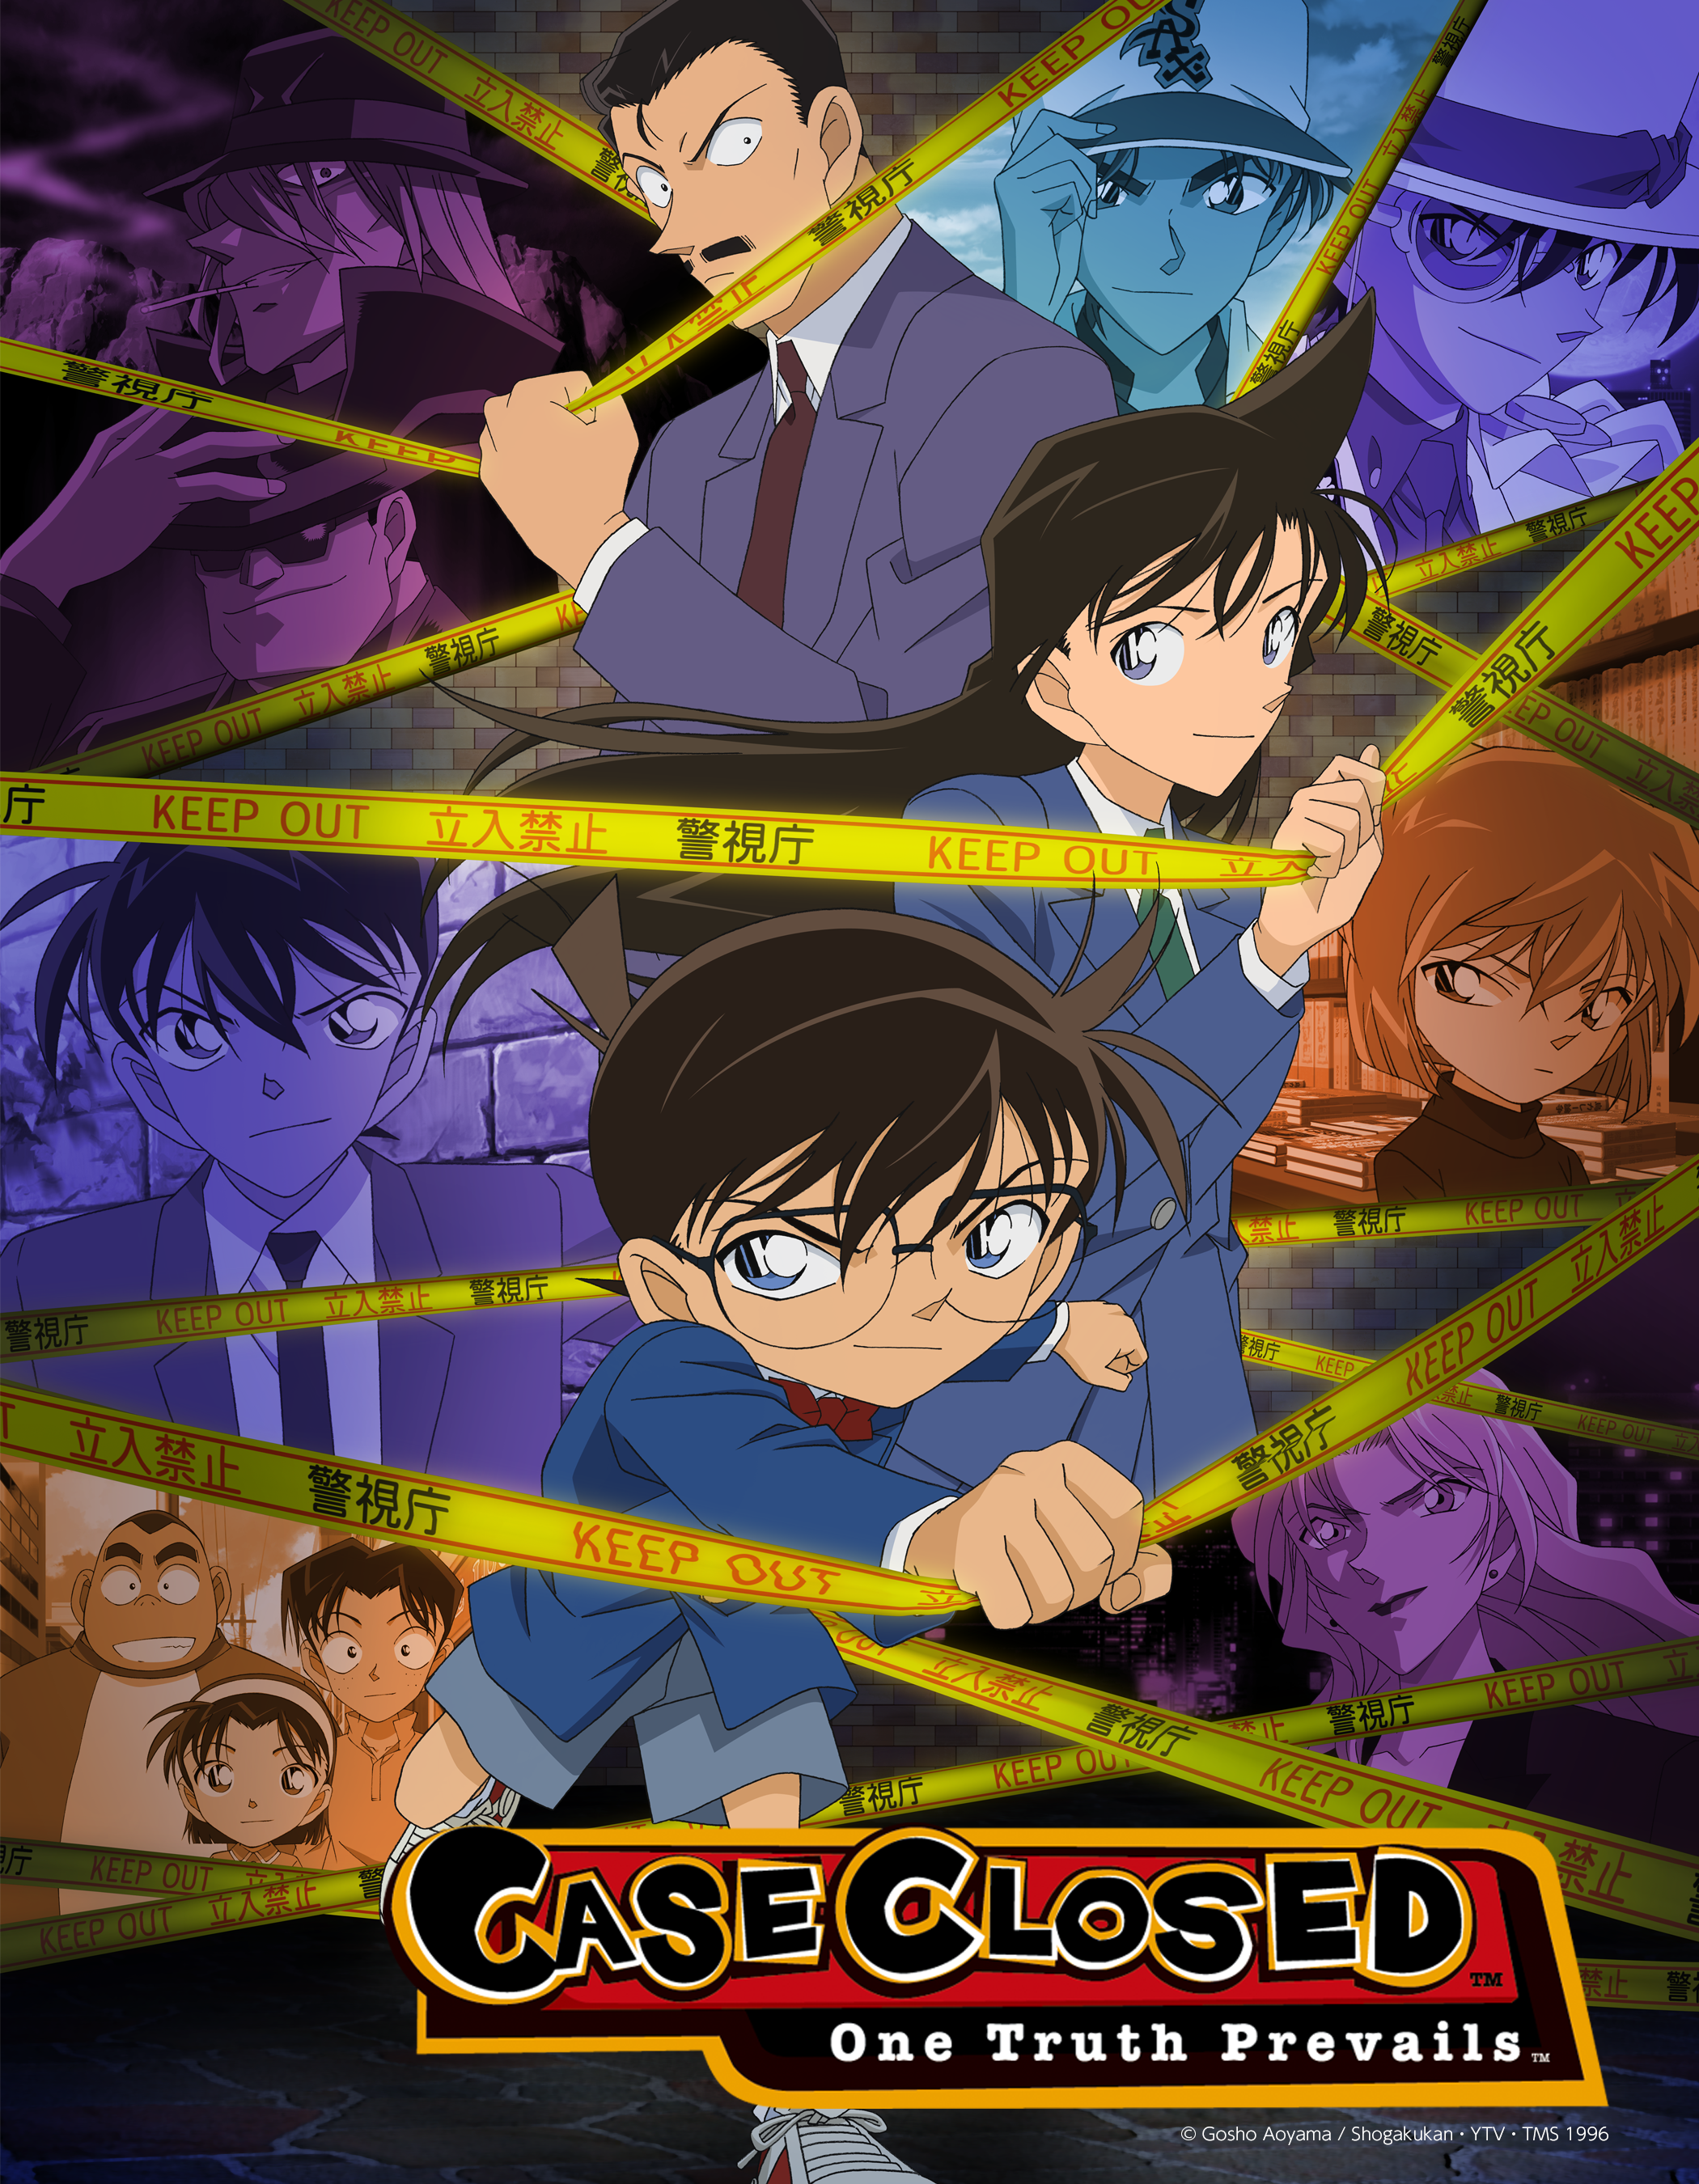 Tubi Adds 10 New EnglishDubbed Case Closed Episodes